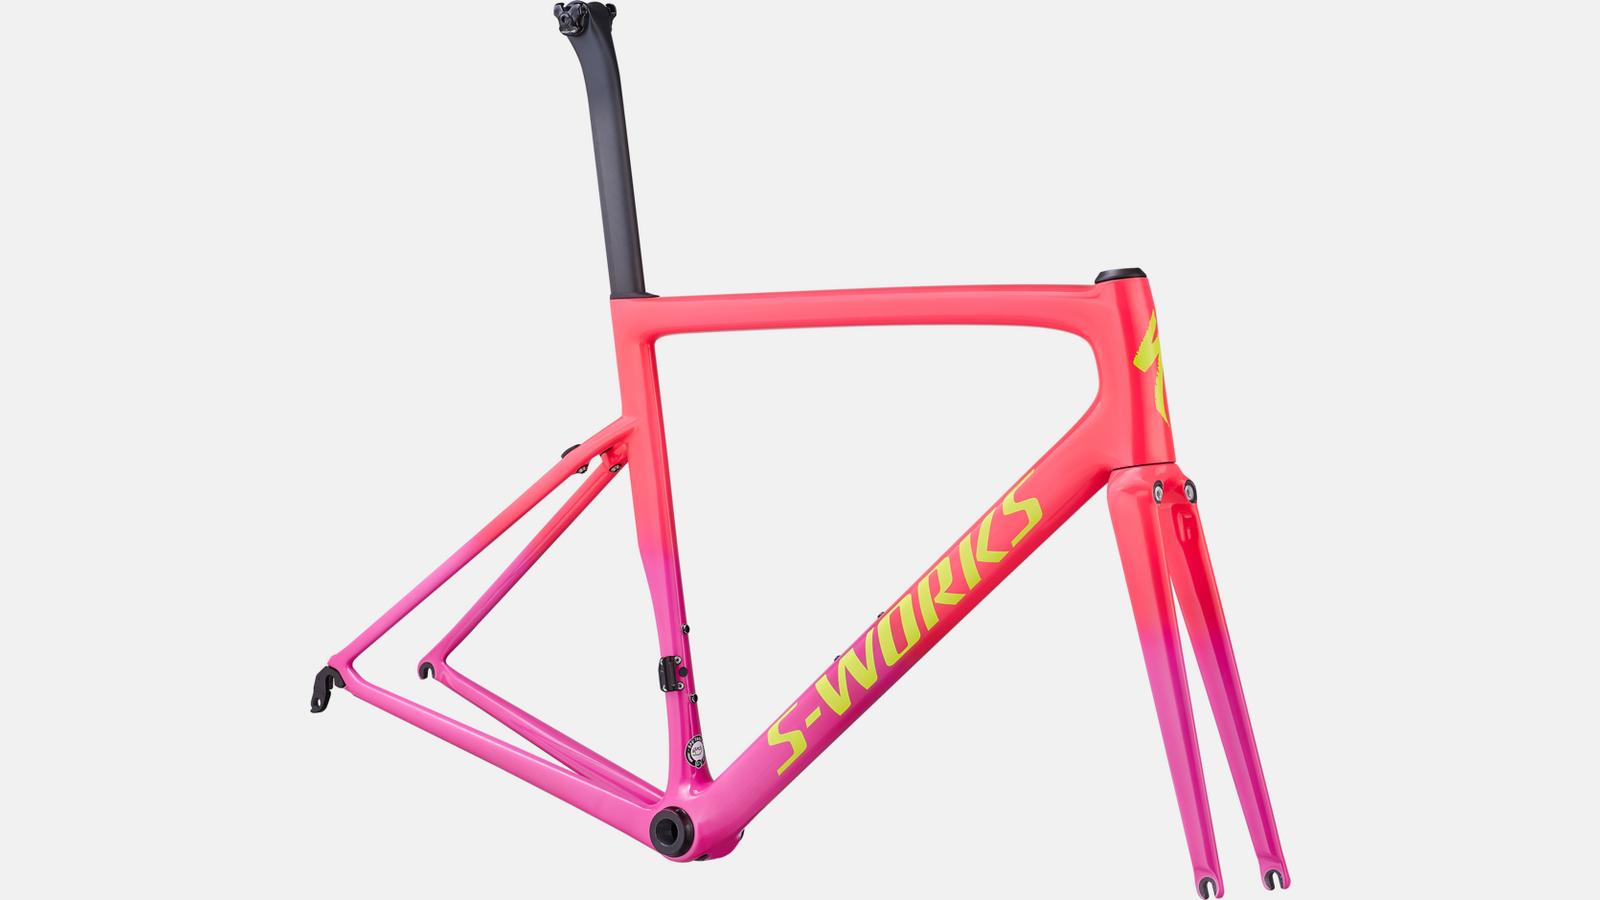 Touch-up paint for 2019 Specialized S-Works Tarmac SL6 Frameset - Gloss Acid Pink